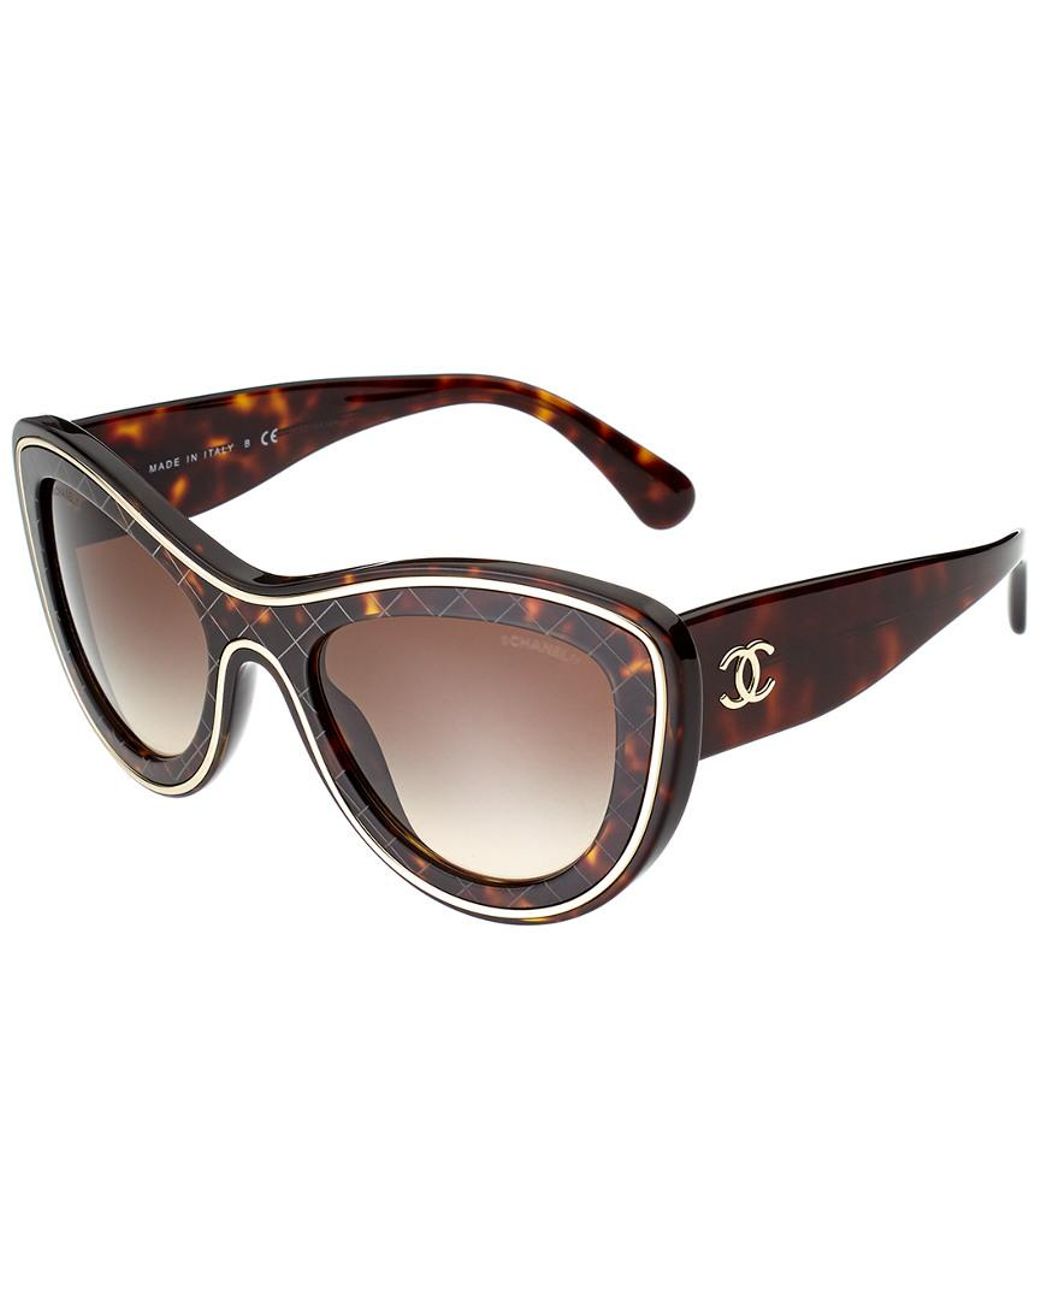 Chanel 5397 53mm Sunglasses in Brown